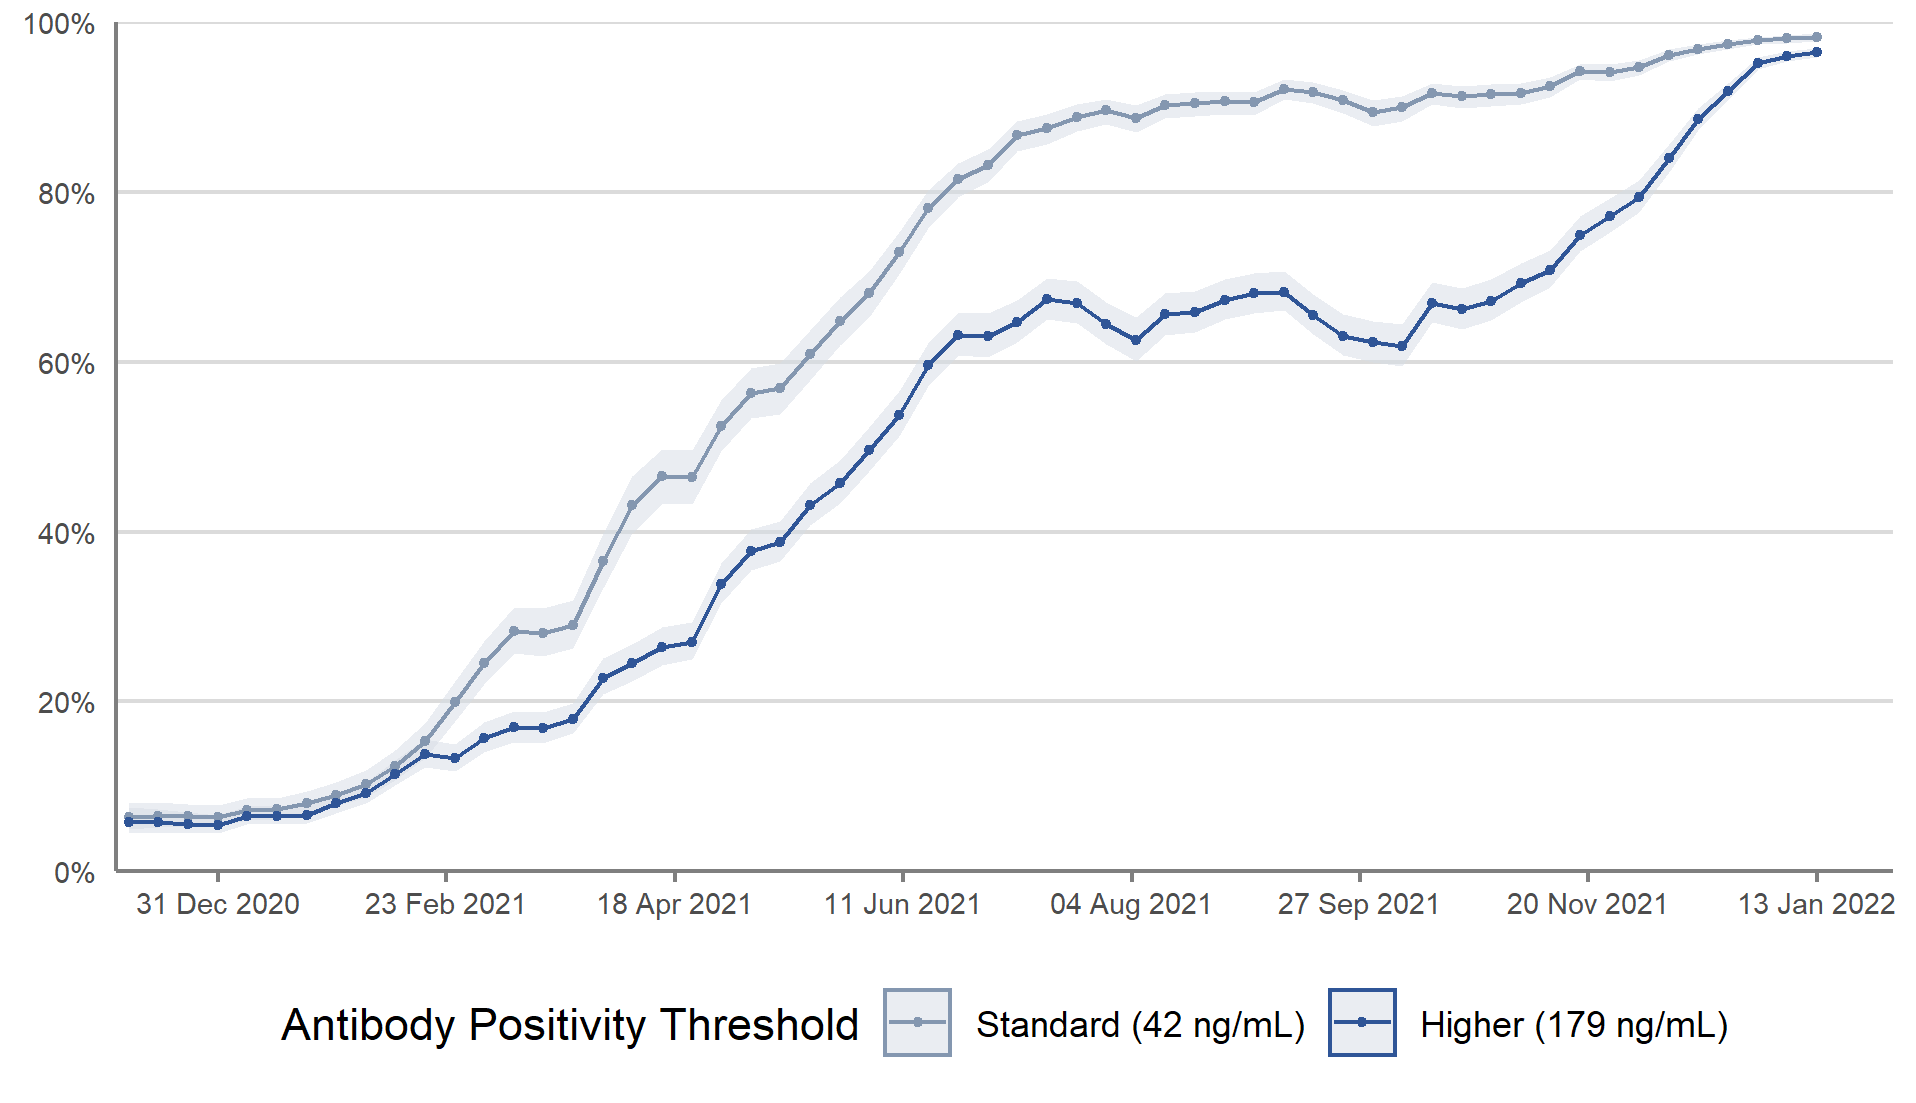 Figure 1: Modelled weekly percentage of people in the adult population living in private residential households testing positive for antibodies to SARS-CoV-2 from a blood sample, from 7 December 2020 to the week beginning 10 January 2022, including 95% credible intervals